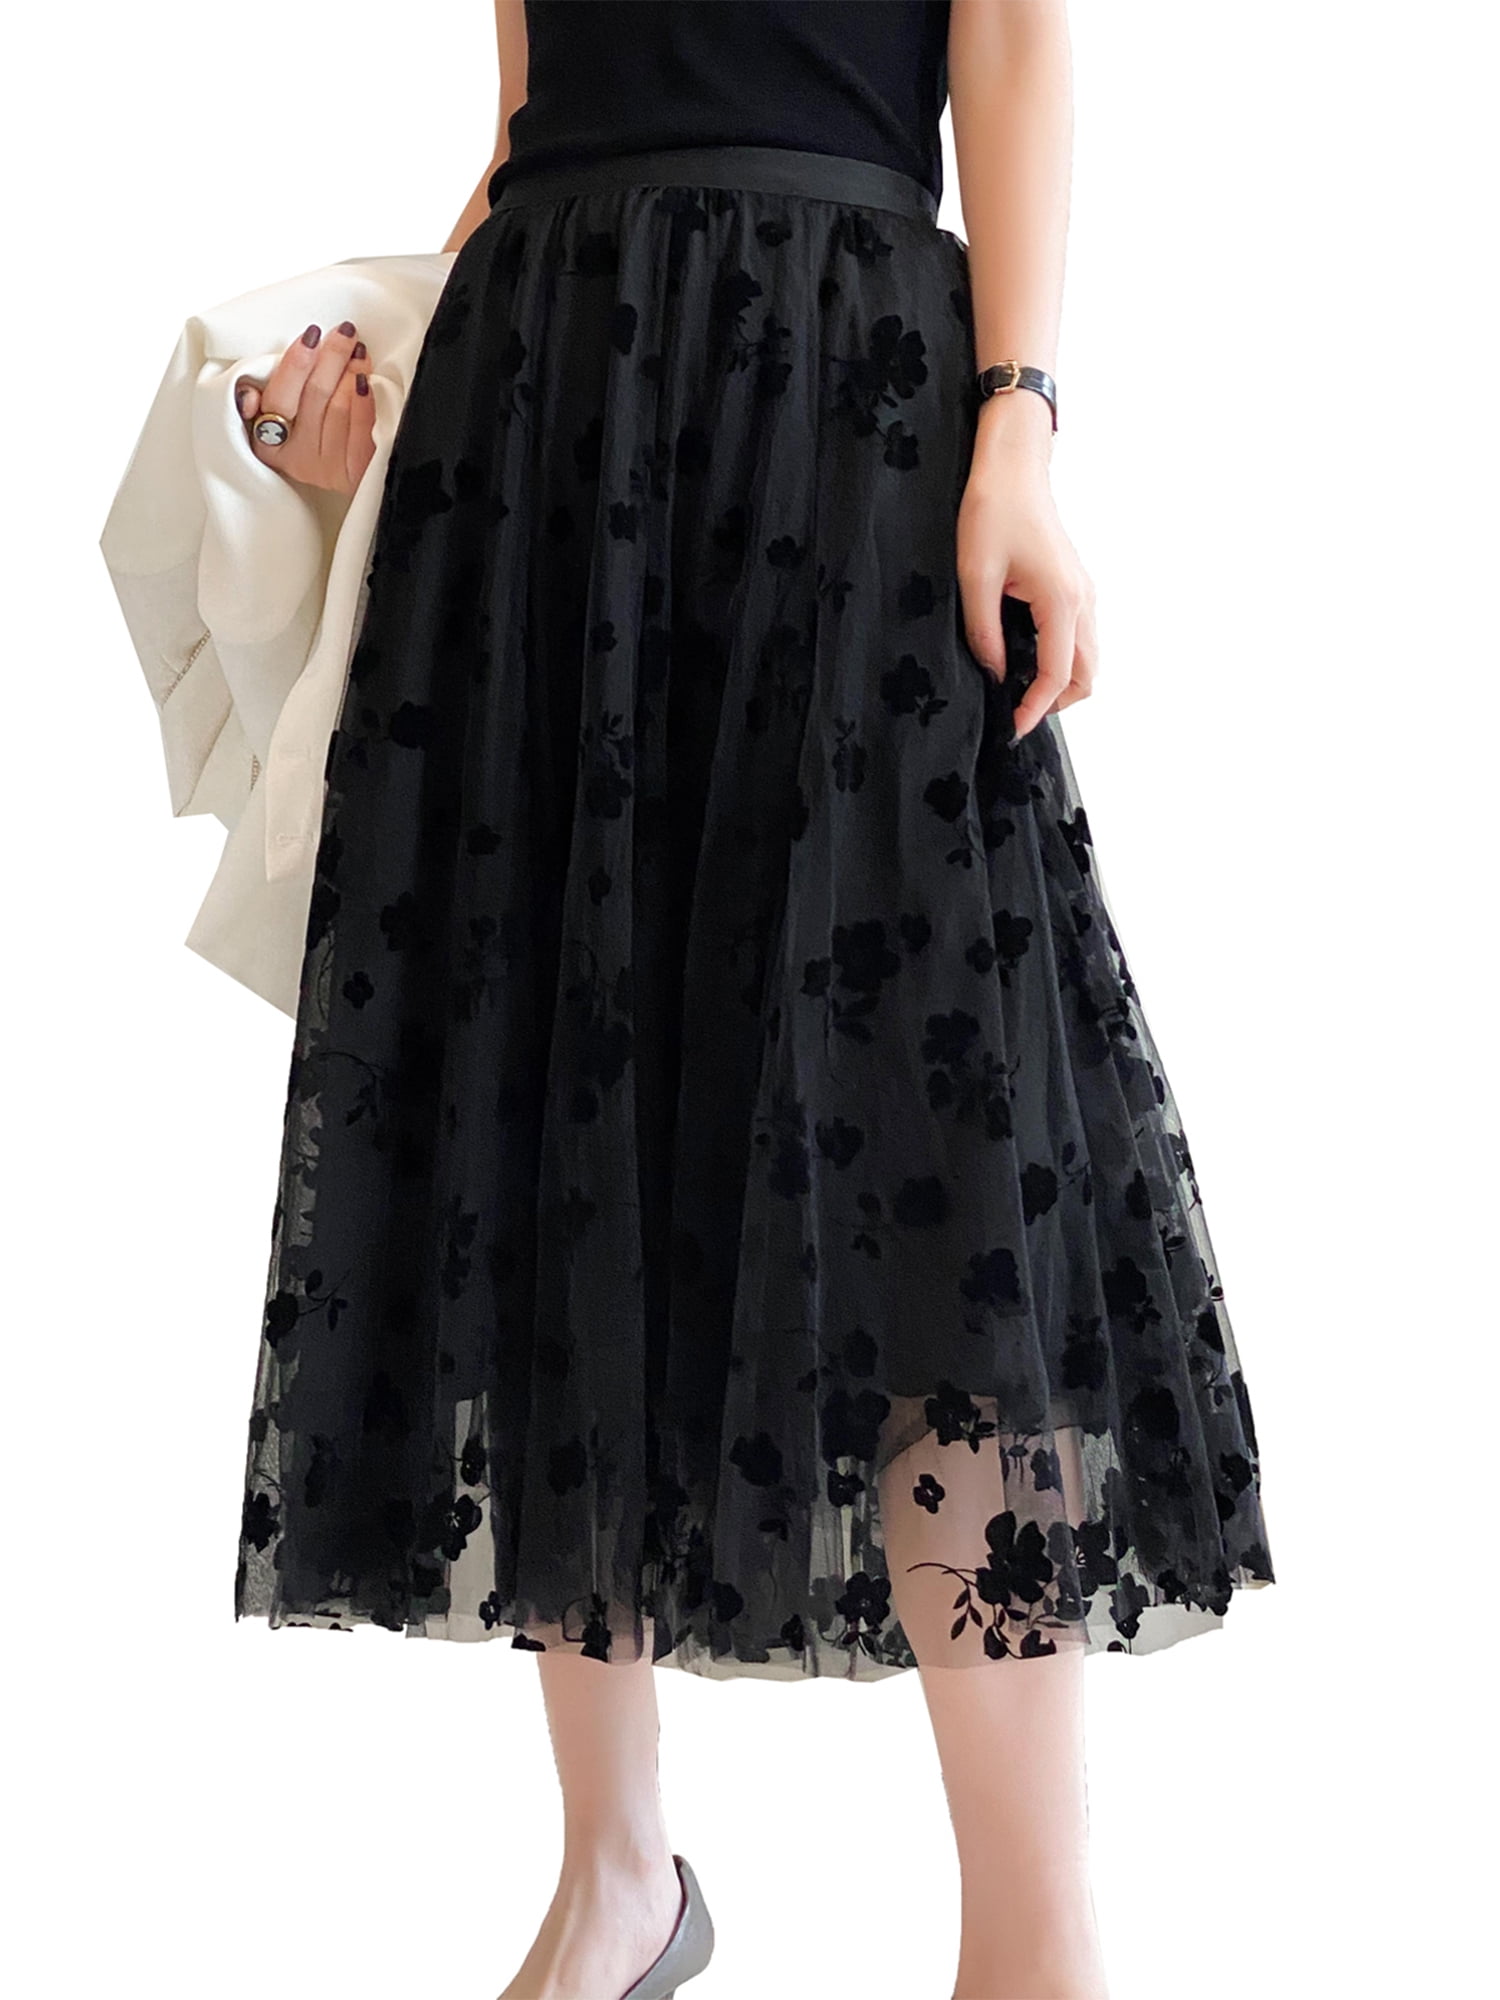 Womens Lace Floral High Waist Dress A-line Midi Skirt Vintage Party Underskirt 